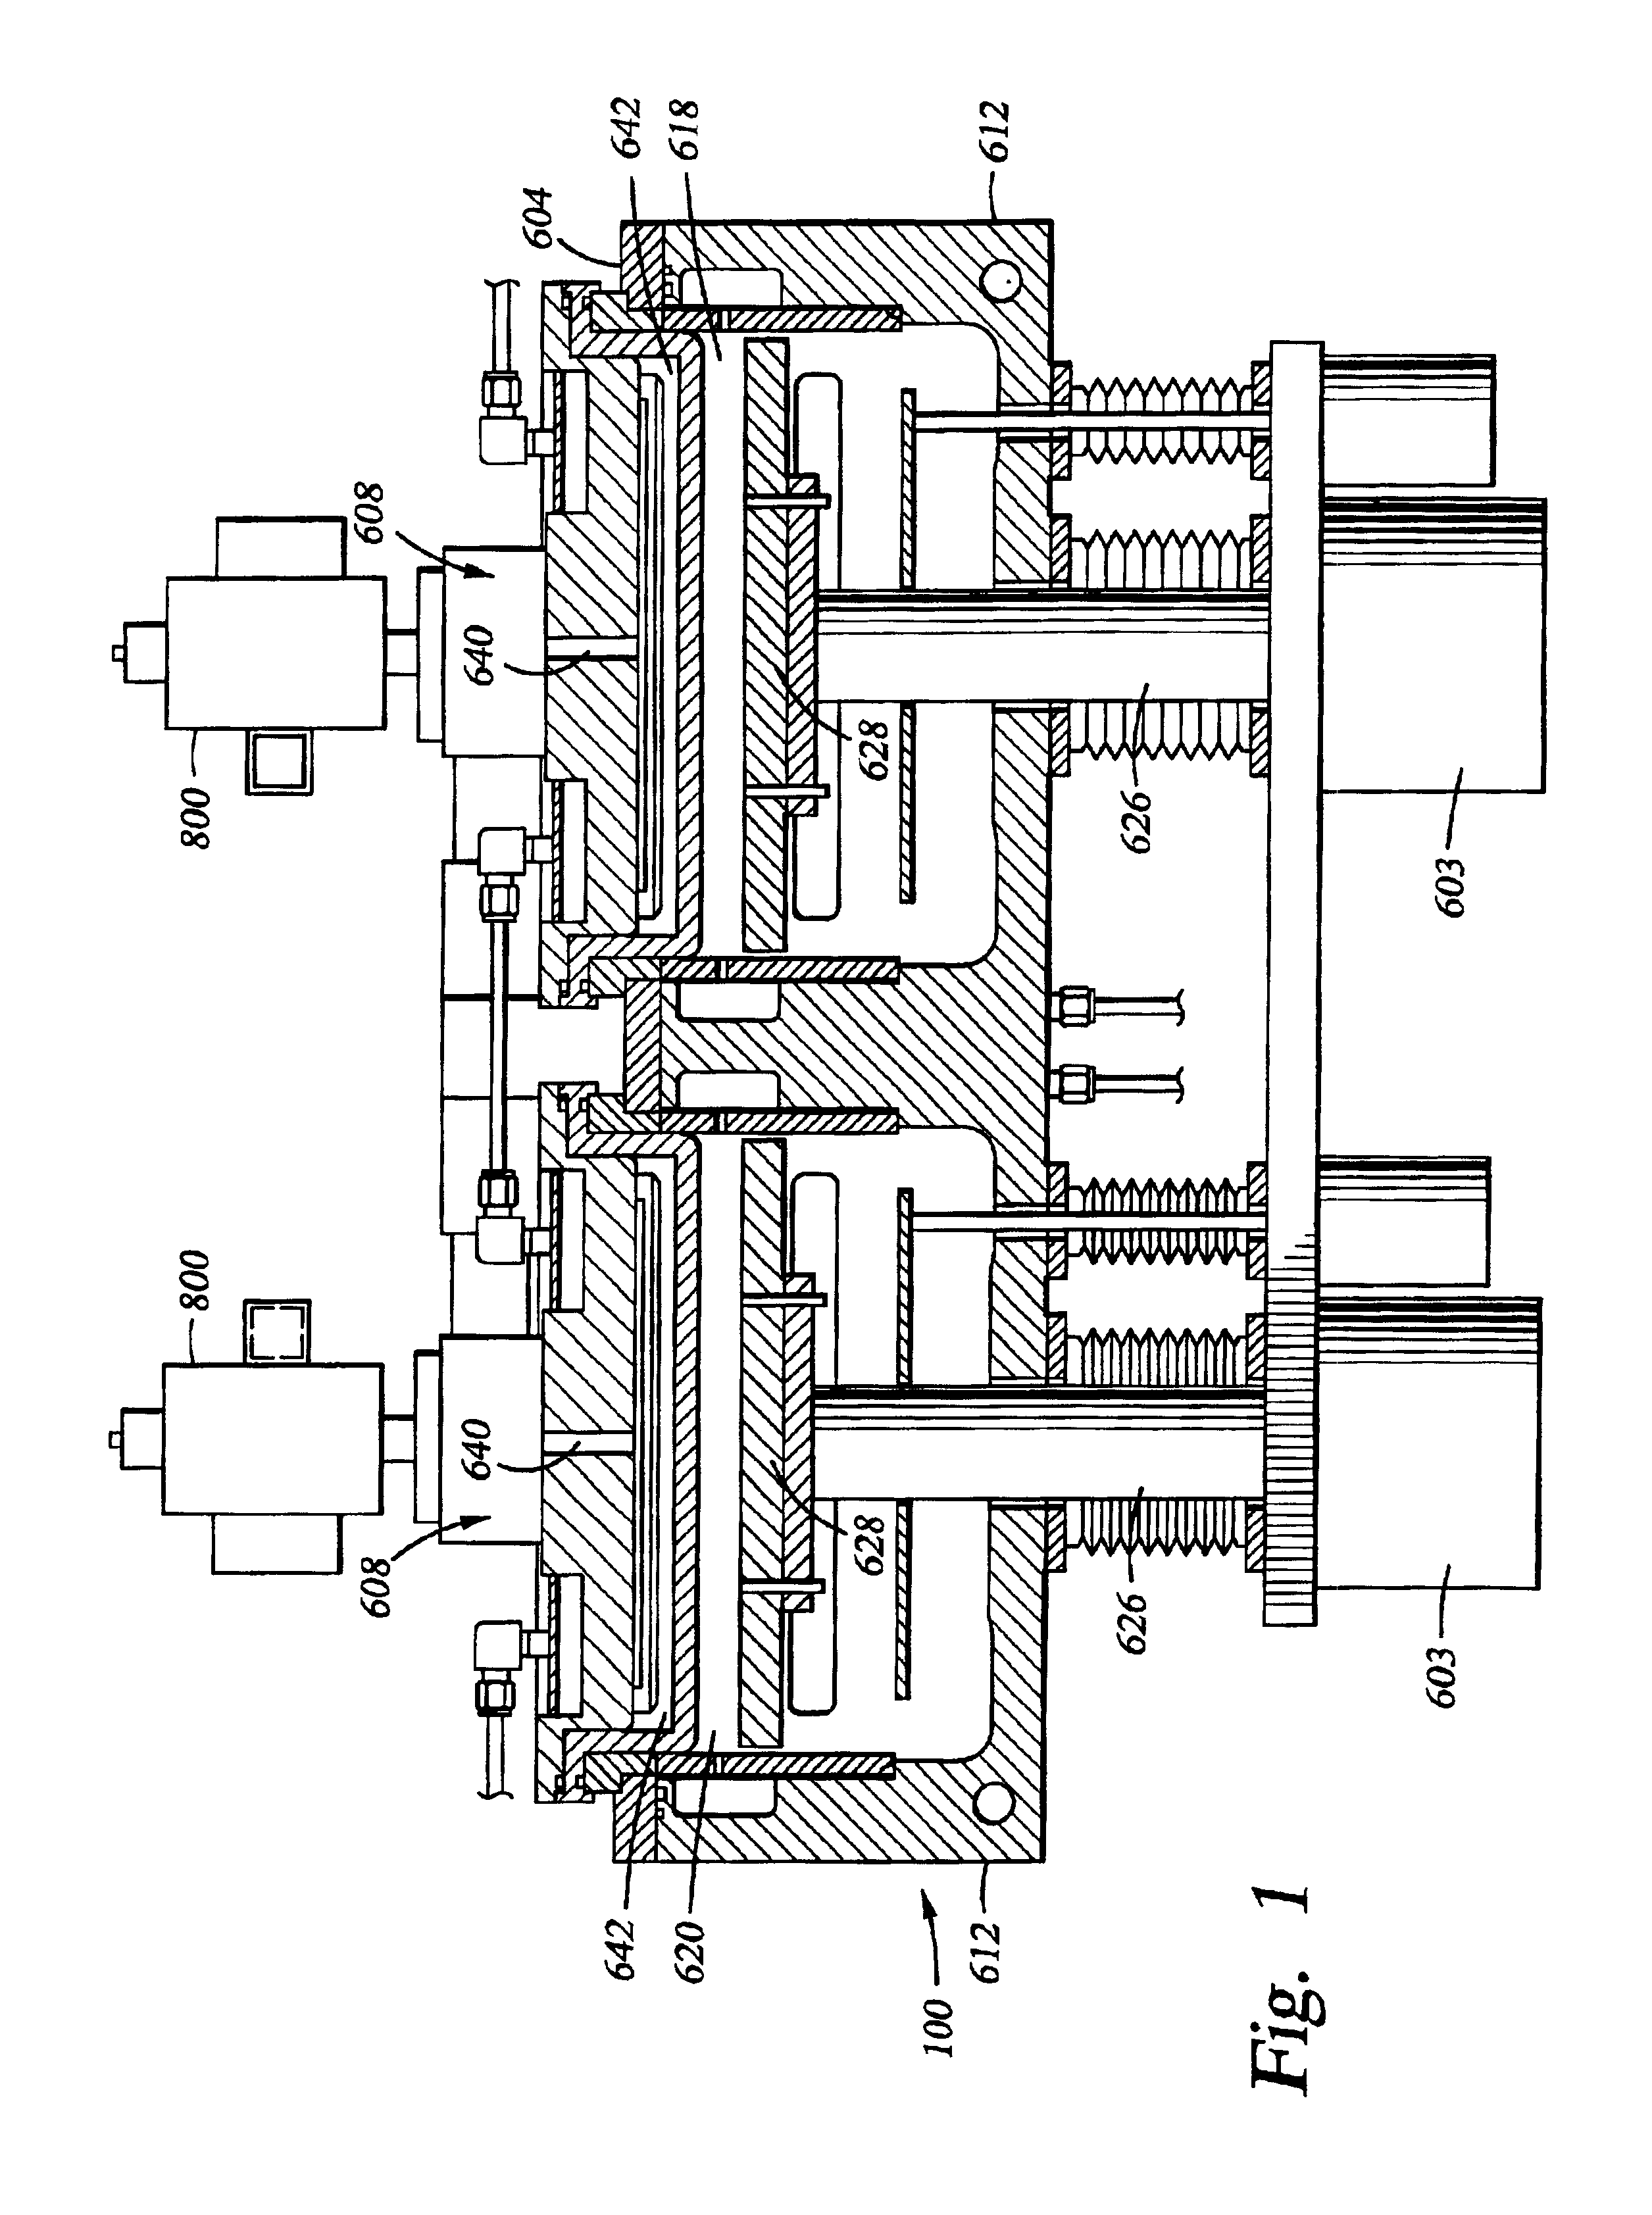 Method for cleaning a process chamber